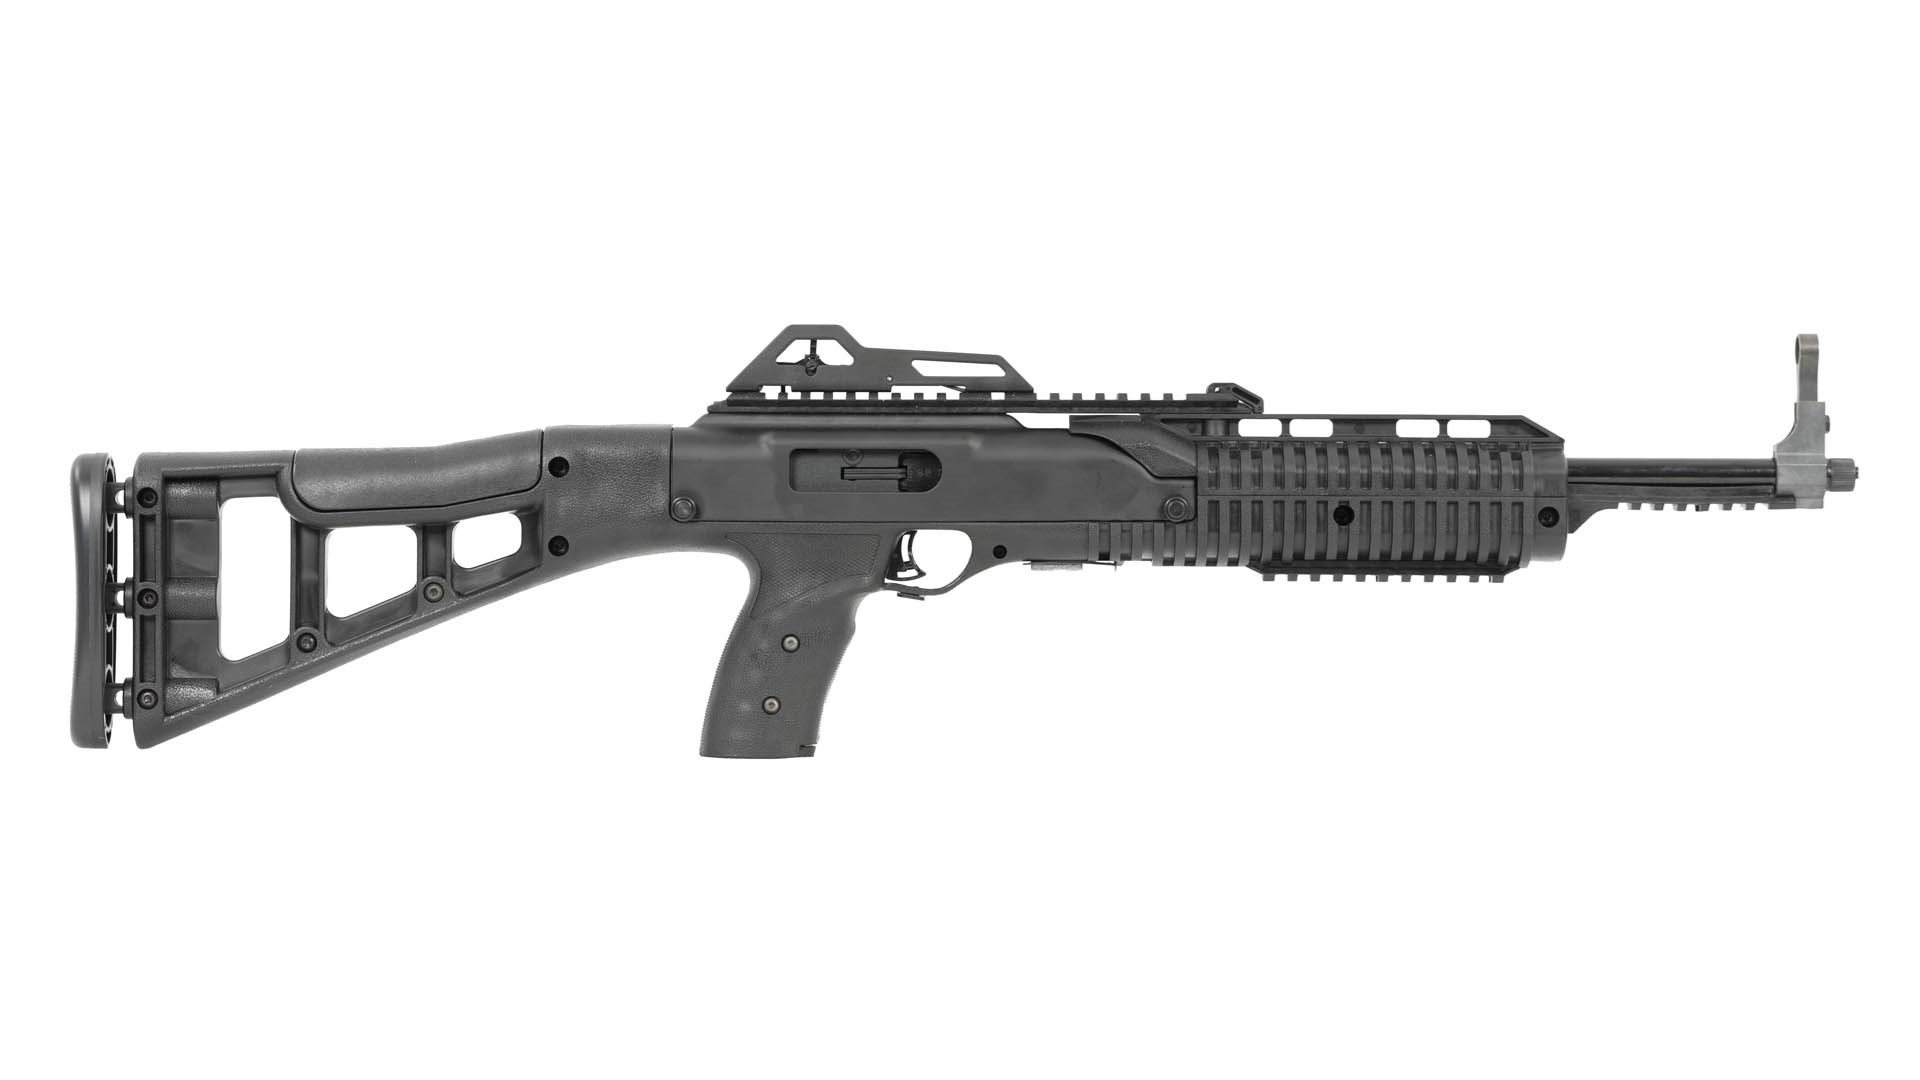 Right side of the Hi-Point 3095 carbine shown on white.